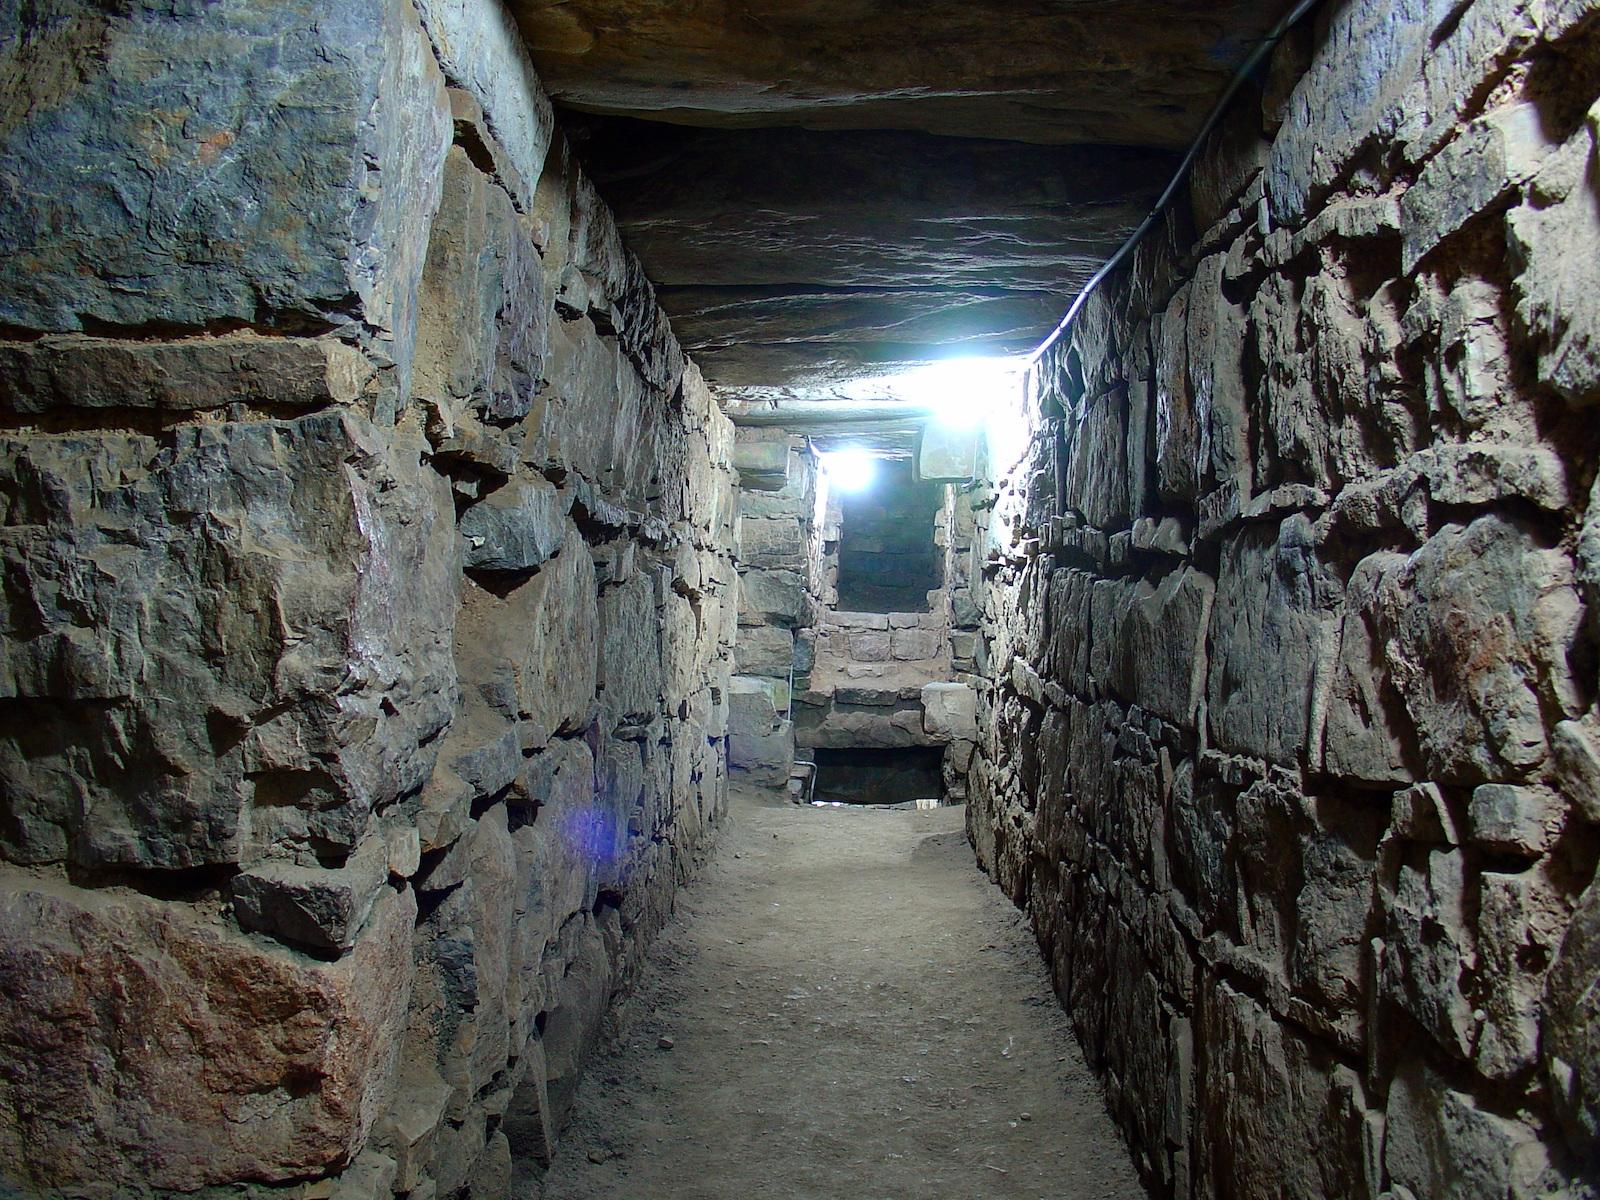 Photo of an interior passage of Chavín de Huántar. The walls appear to be made from stacks of large stone cubes, most layers are separated by thin, flat stones.